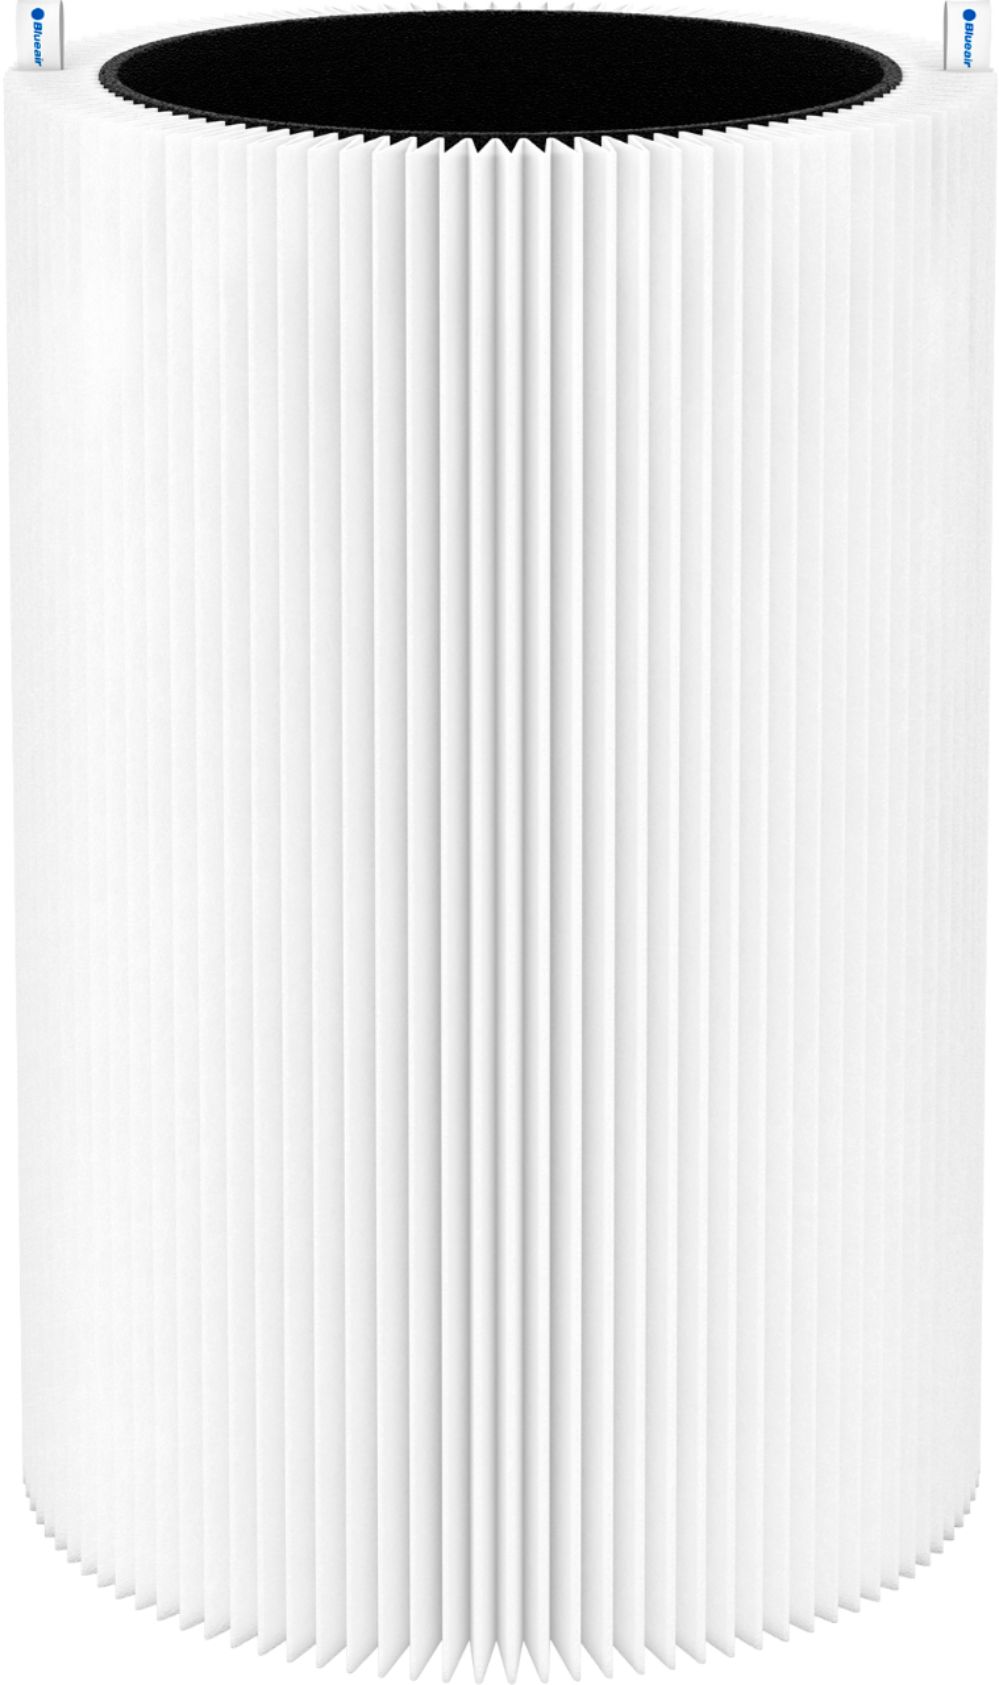 Blueair - Particle + Carbon Filter for Blue Pure 411 - Black/White